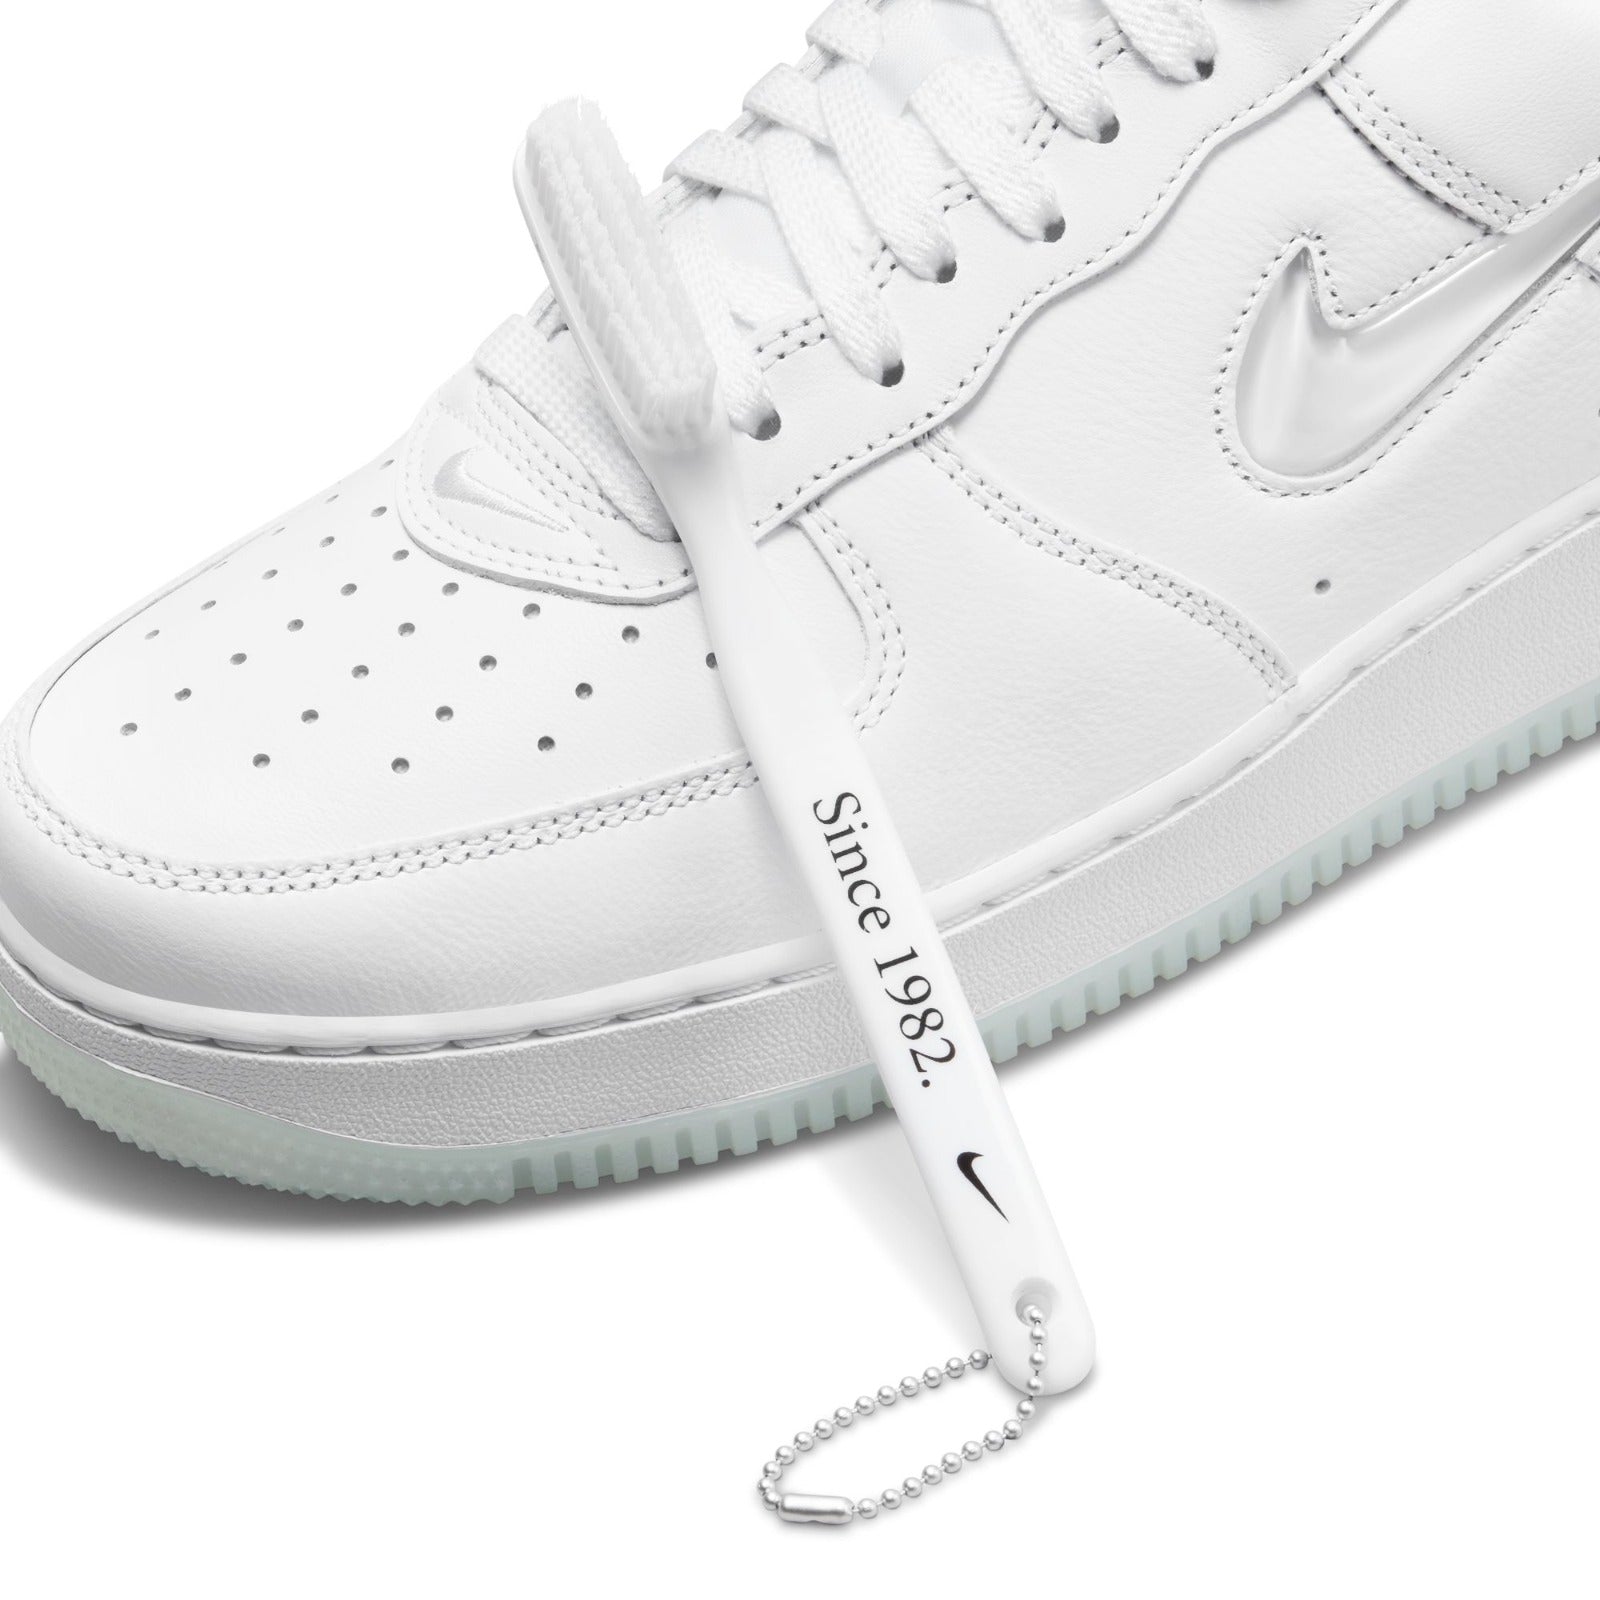 Nike Air Force 1 Low Retro Color of the Month "Triple White" - Men